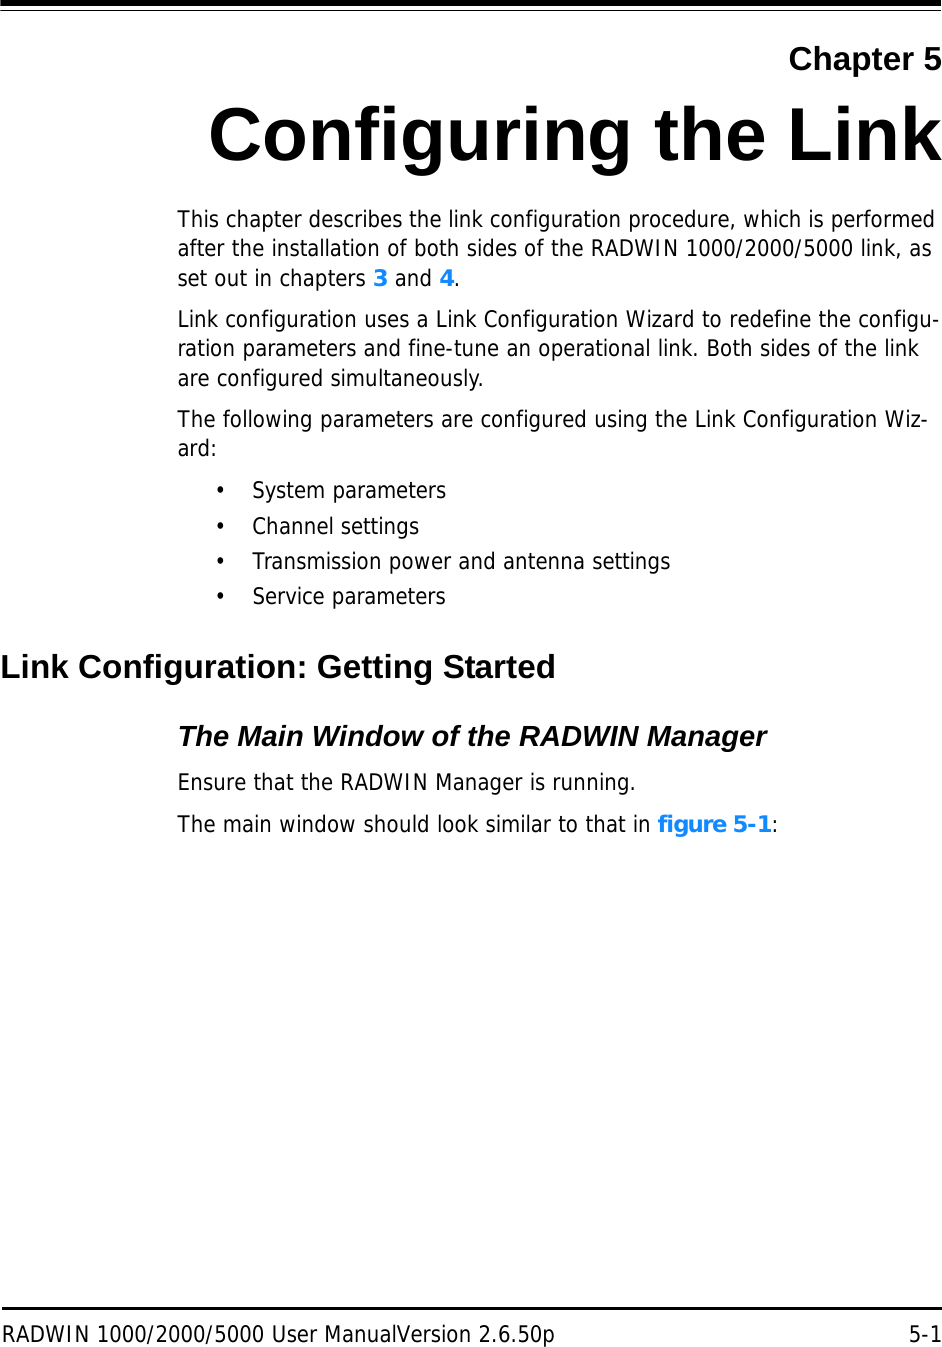 RADWIN 1000/2000/5000 User ManualVersion 2.6.50p 5-1Chapter 5Configuring the LinkThis chapter describes the link configuration procedure, which is performed after the installation of both sides of the RADWIN 1000/2000/5000 link, as set out in chapters 3 and 4.Link configuration uses a Link Configuration Wizard to redefine the configu-ration parameters and fine-tune an operational link. Both sides of the link are configured simultaneously.The following parameters are configured using the Link Configuration Wiz-ard:• System parameters• Channel settings• Transmission power and antenna settings•Service parametersLink Configuration: Getting StartedThe Main Window of the RADWIN ManagerEnsure that the RADWIN Manager is running.The main window should look similar to that in figure 5-1: